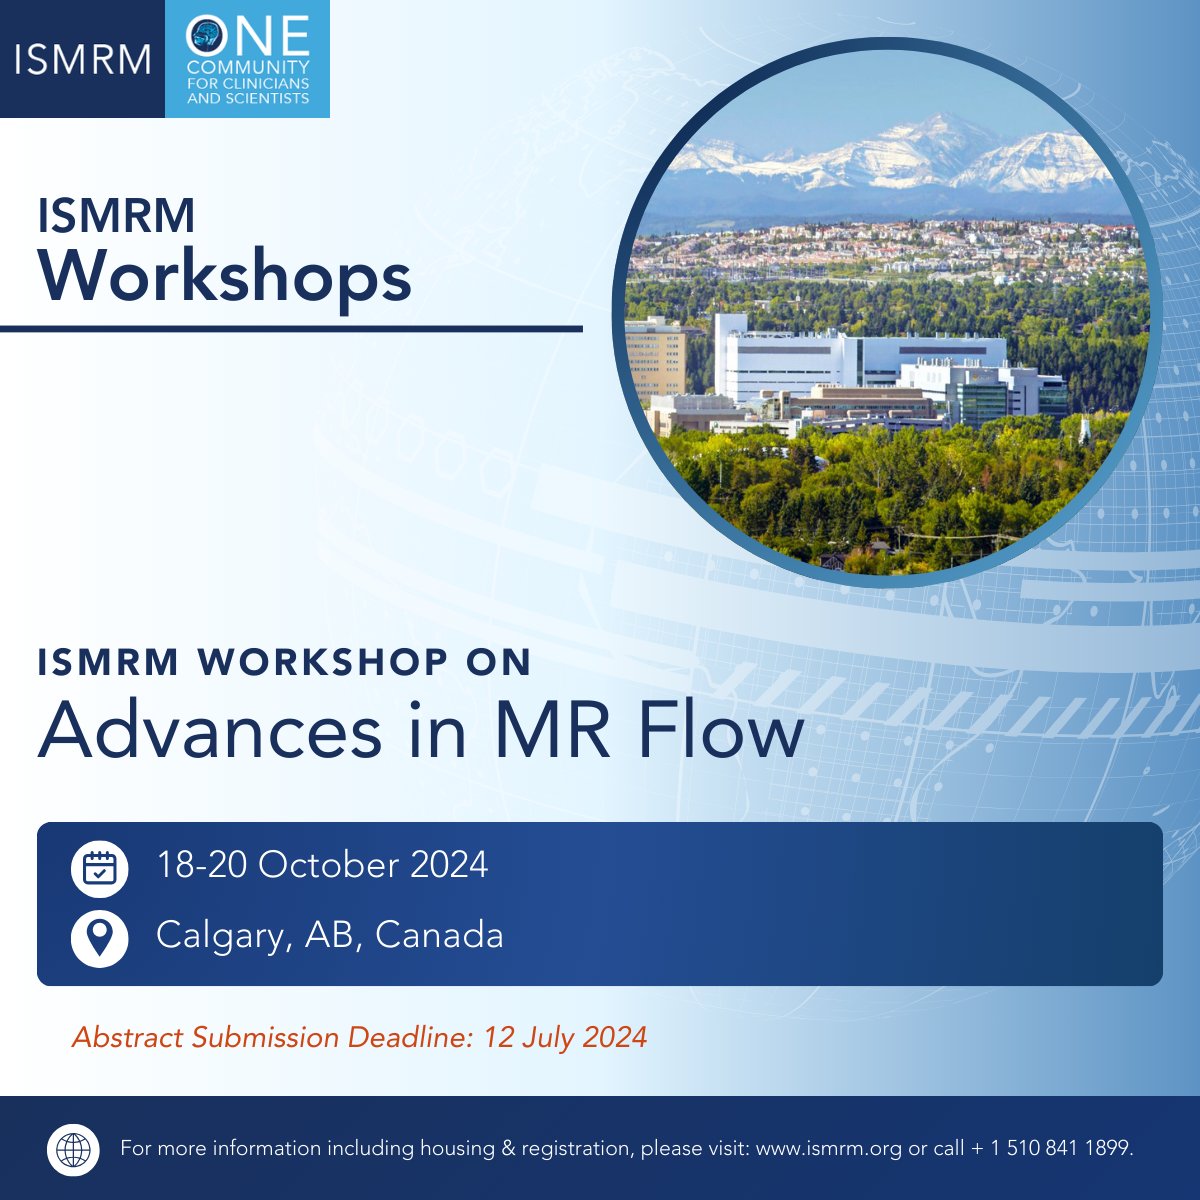 WORKSHOP WEDNESDAY: Get your abstracts ready for the ISMRM Workshop on Advances in MR Flow! The abstract submission & stipend application site is now open: ismrm.org/workshops/2024… Registration coming soon! #ISMRM #ISMRT #MRI #MagneticResonance #MR #Radiology #MedicalImaging